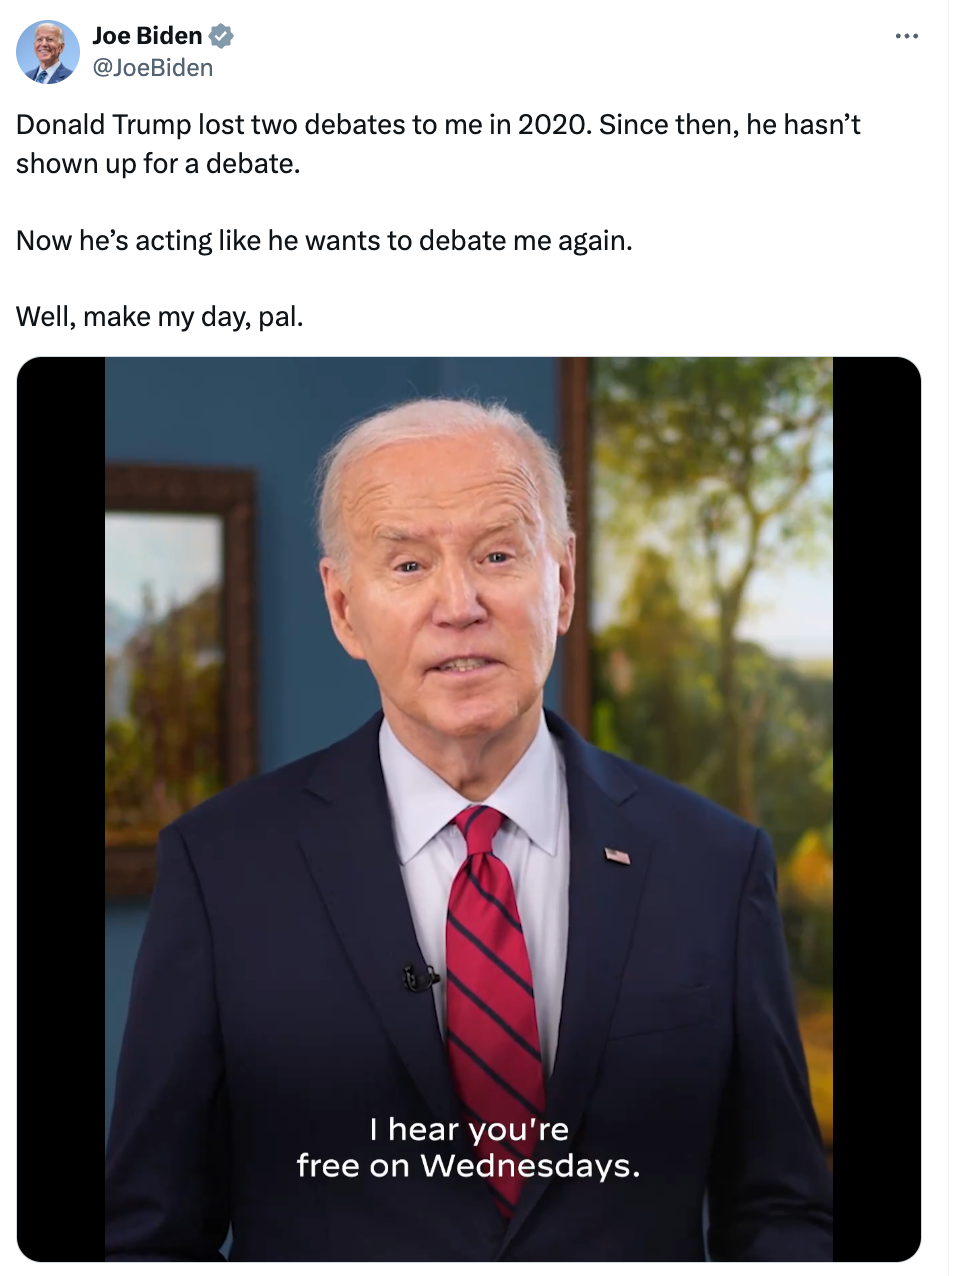 Biden: Donald Trump lost two debates to me in 2020. Since then, he hasn't shown up for a debate. Now he's acting like he wants to debate again. Well, make my day, pal.